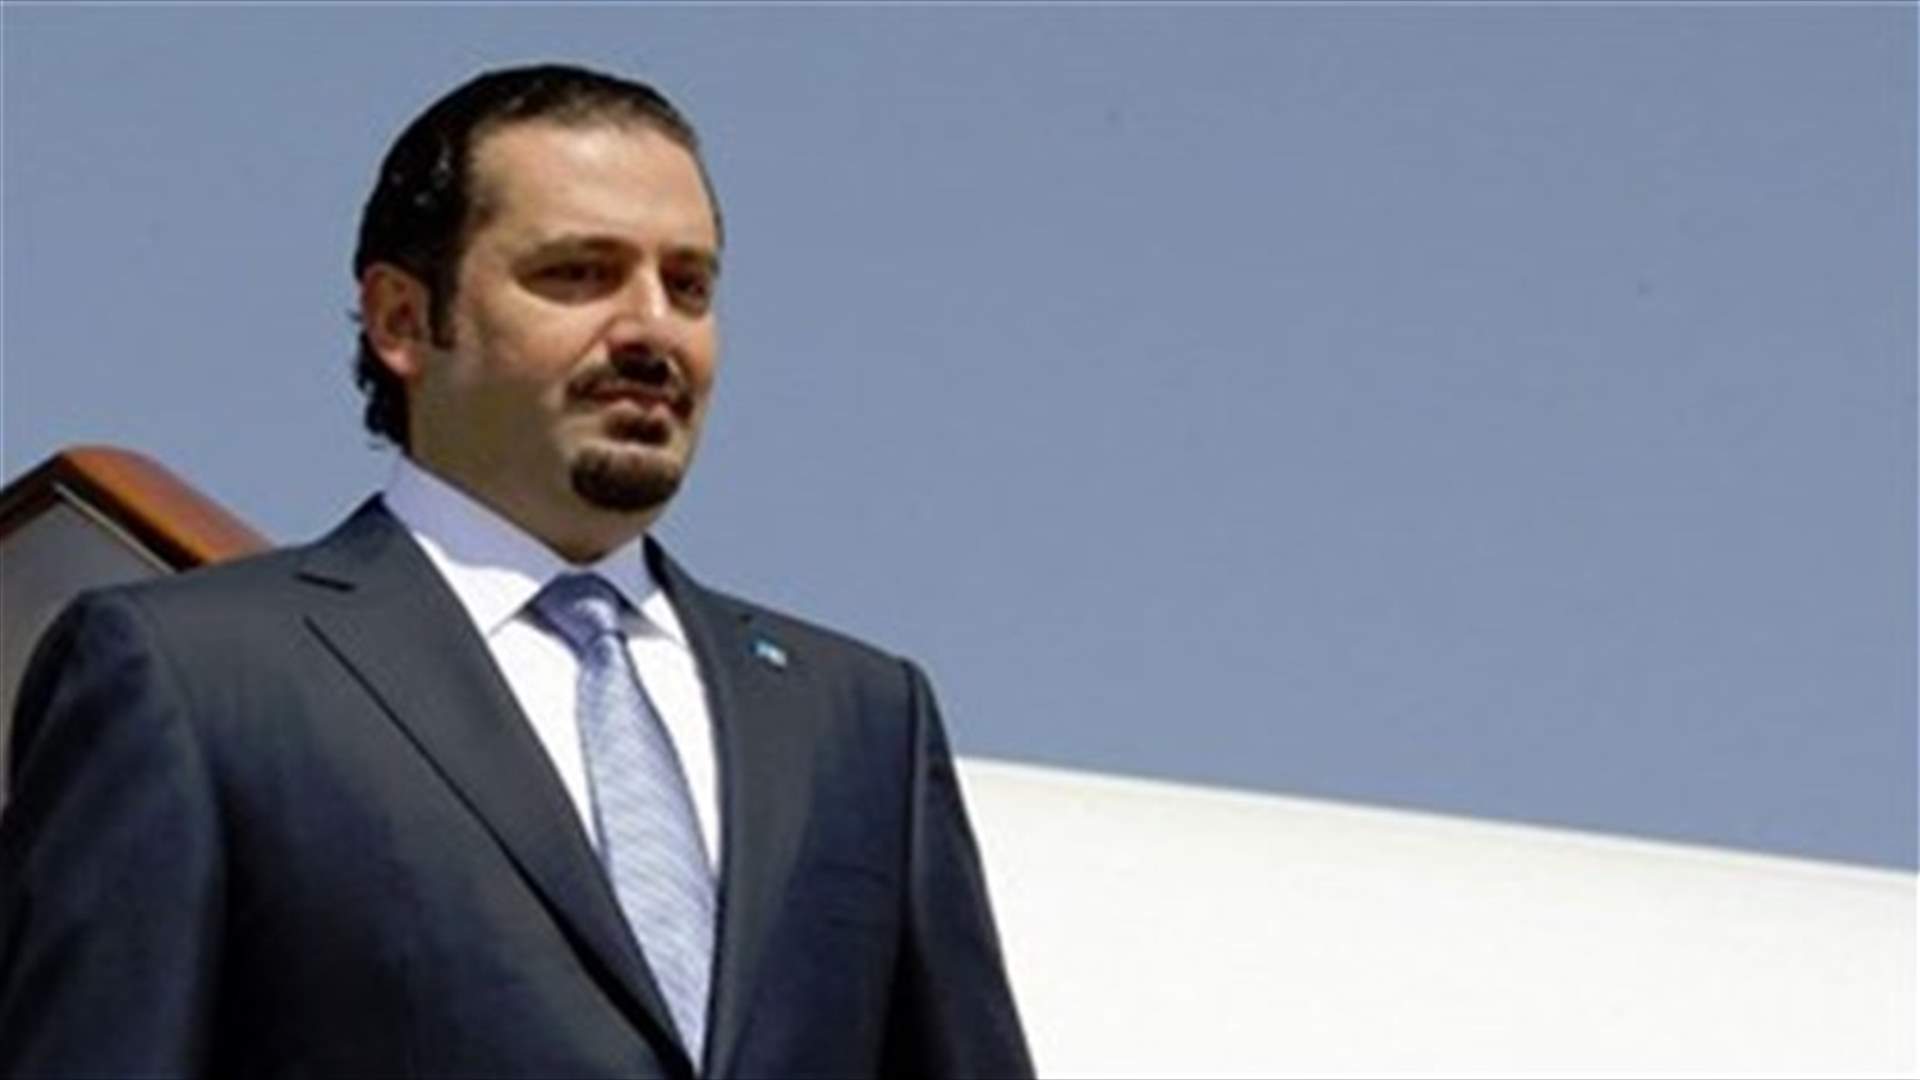 France believes Lebanon&#39;s Hariri free of movements in Saudi - foreign minister